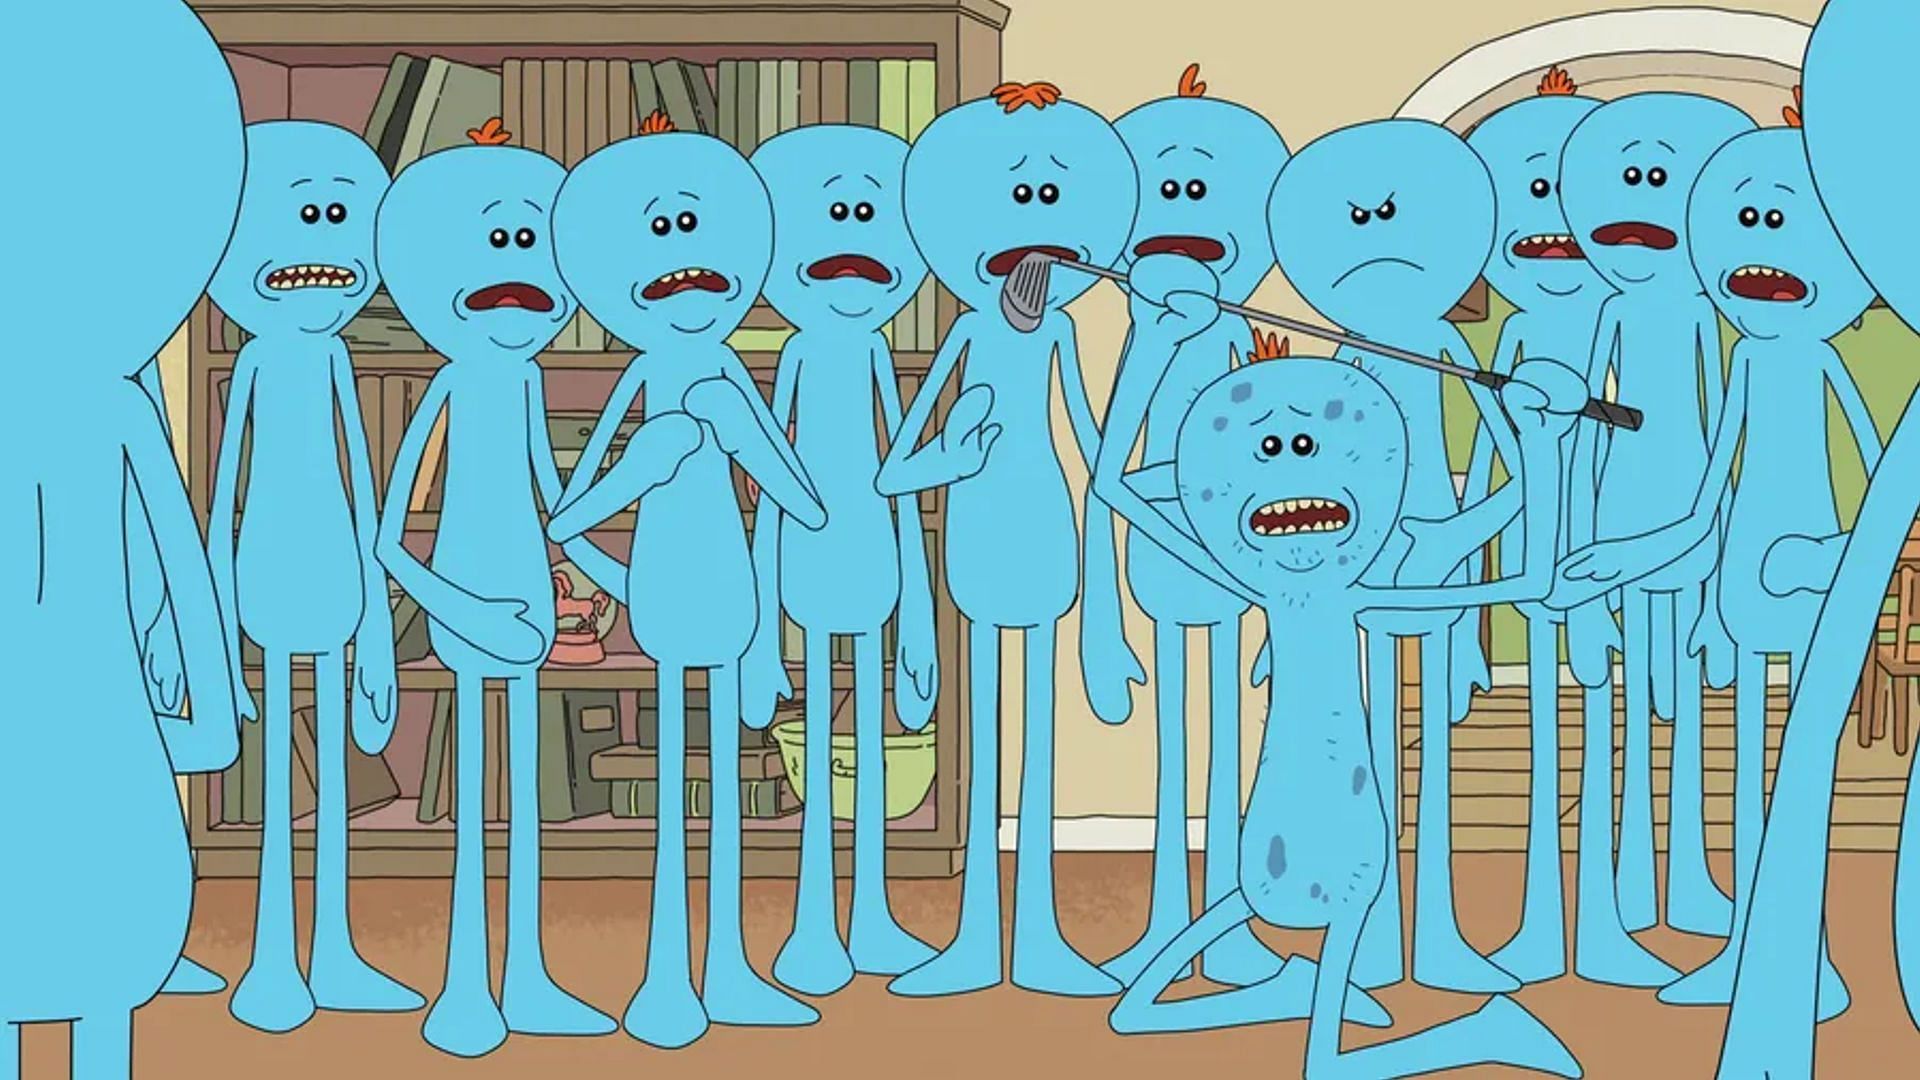 Mr. Meeseeks was an interesting addition to Rick and Morty (Image via Adult Swim)